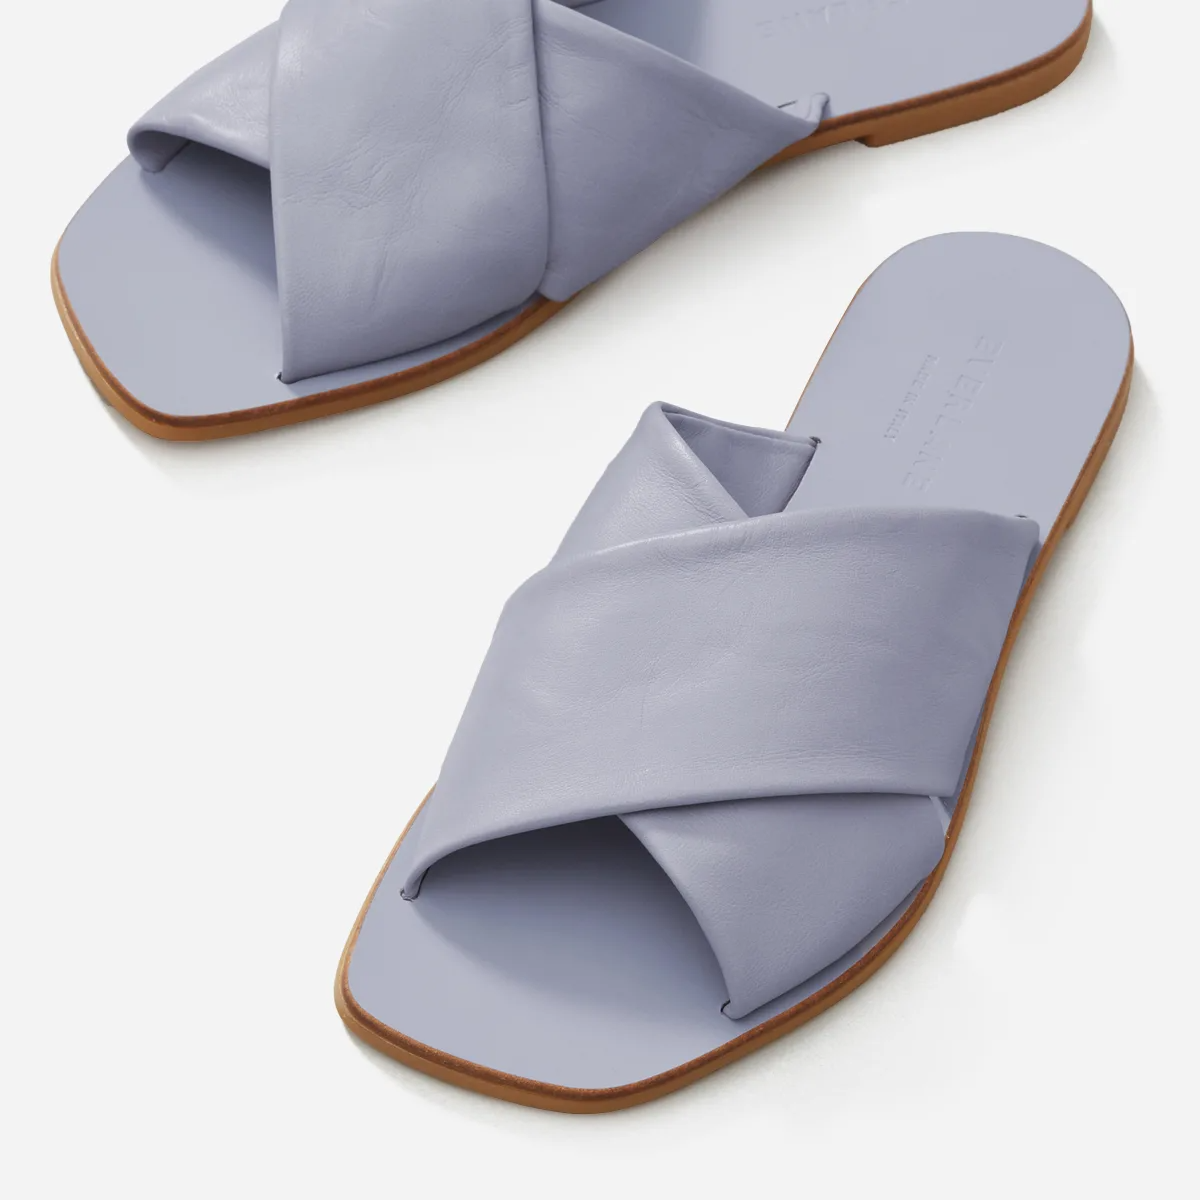 Everlane + The Day Crossover Sandal (6 Colors)